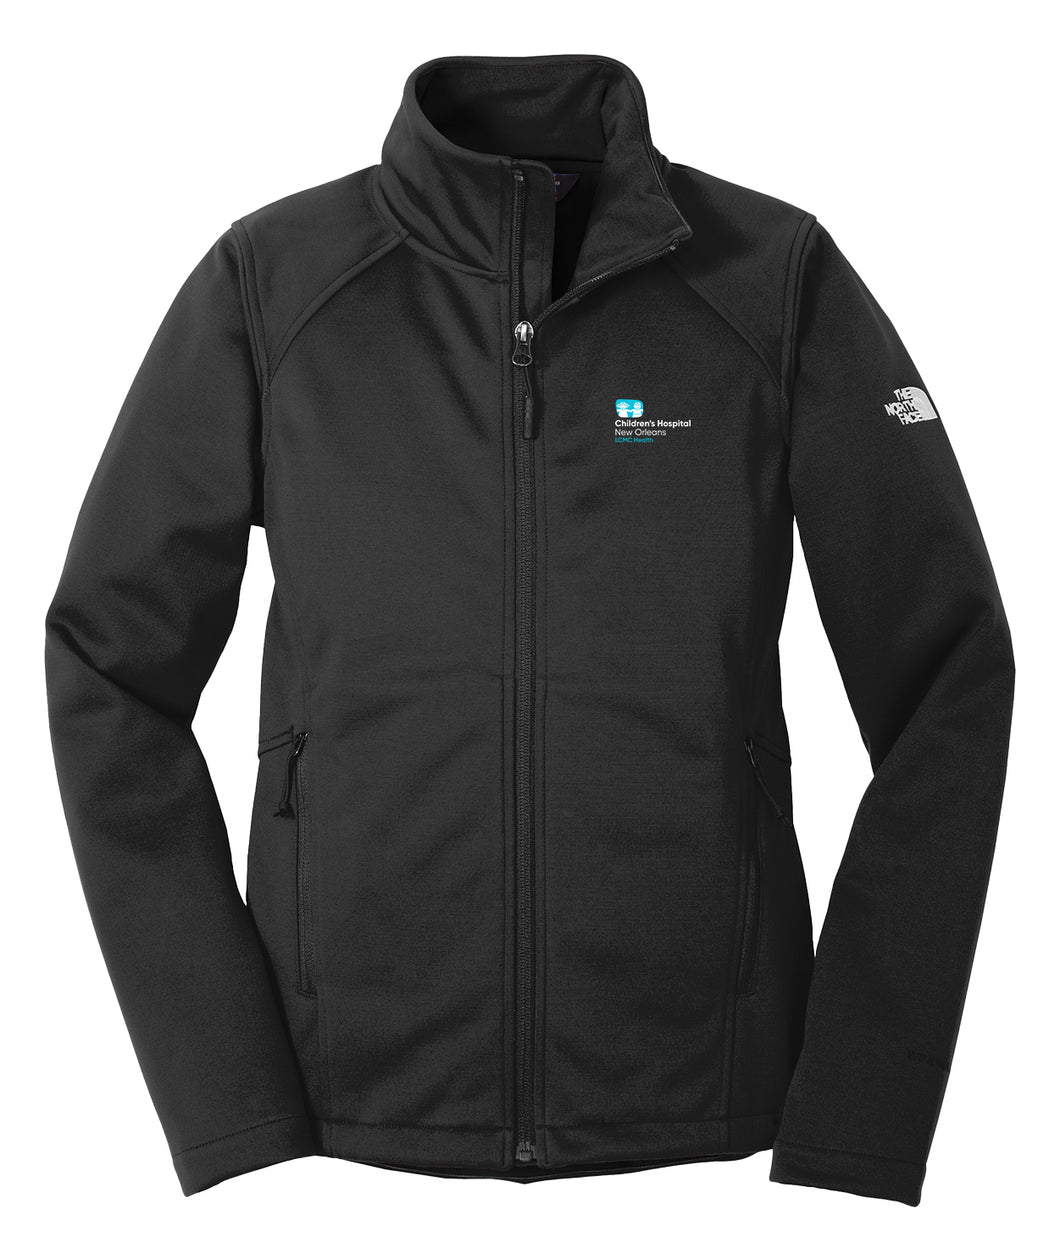 Children's Hospital Personal Item  The North Face® Ladies Ridgewall Soft Shell Jacket with Embroidered Logo